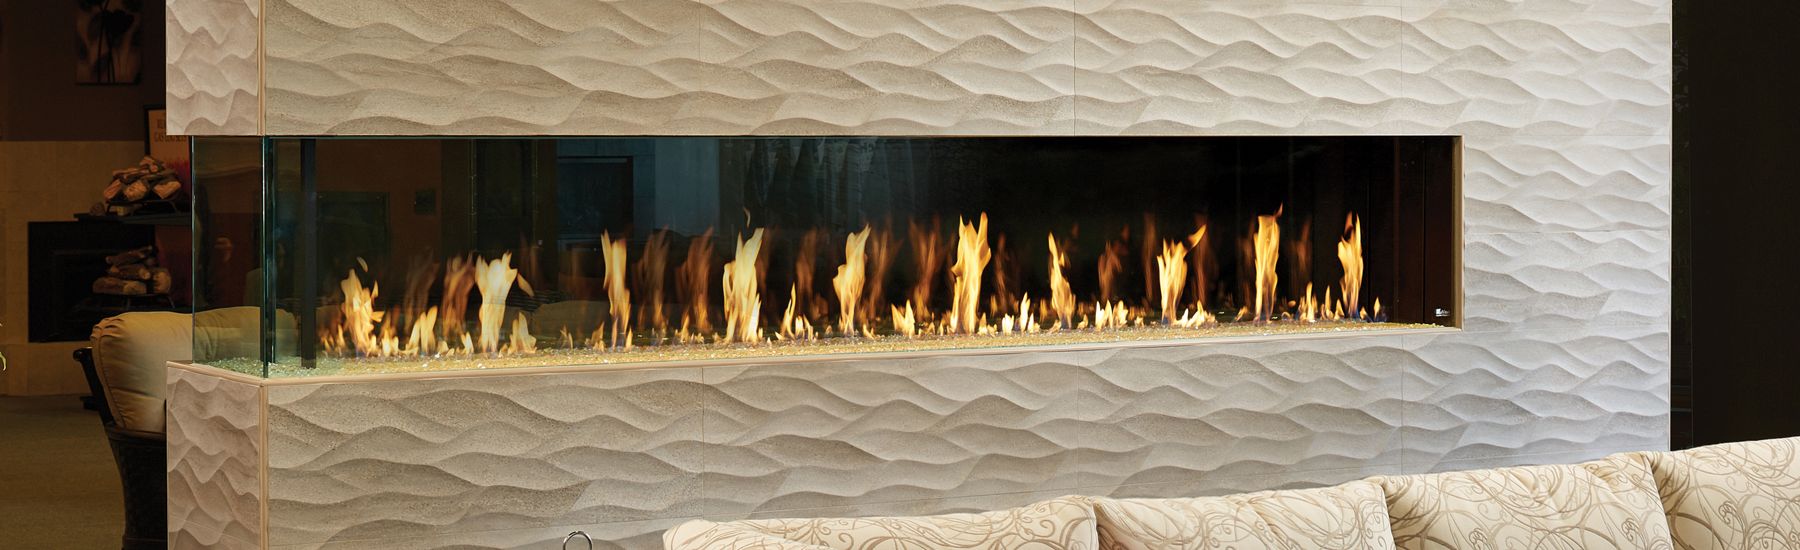 Get Cozy and Warm With a new fireplace from The Fireplace Den